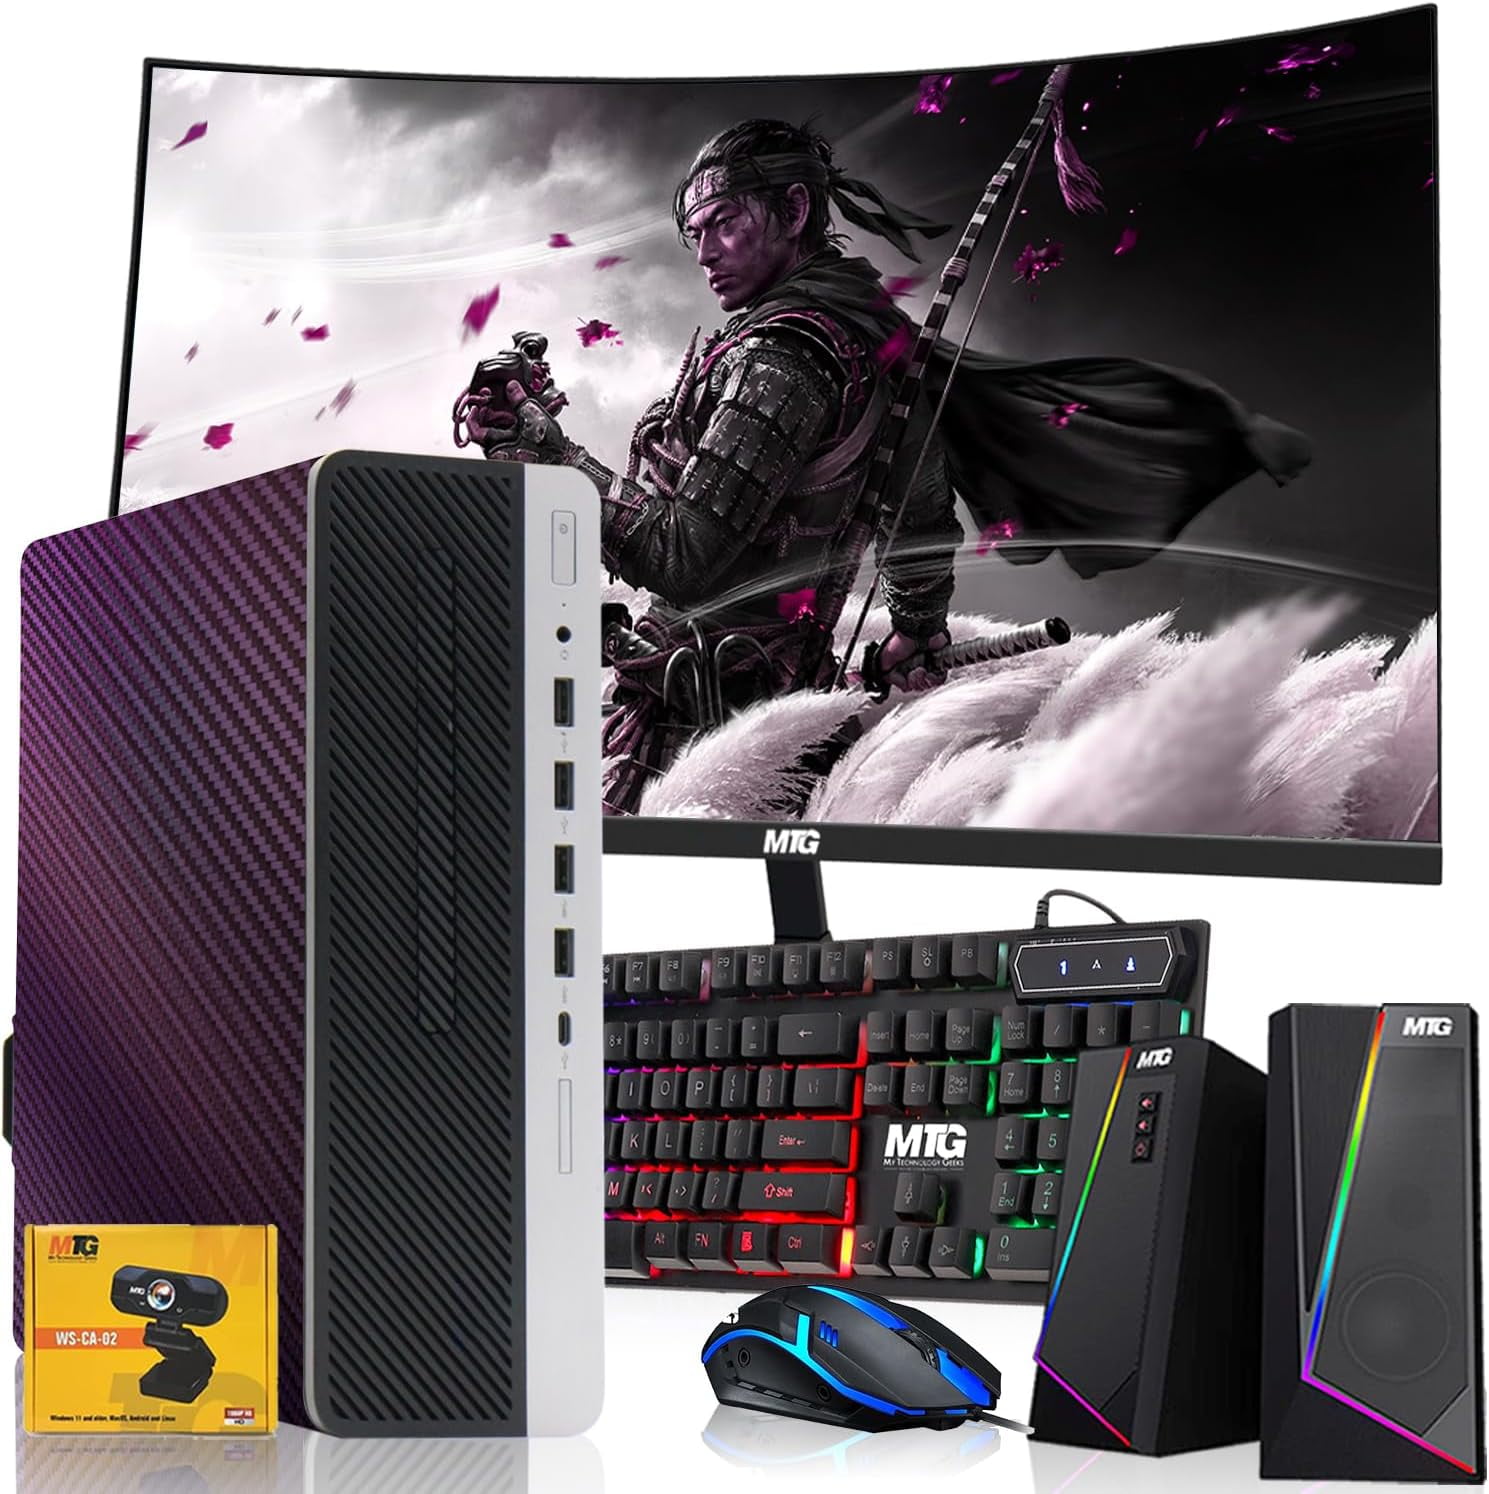 Restored HP G3 Gaming Desktop, Chameleon Edition – Core i5 6th Gen | 16GB DDR4 Ram | 512GB SSD | GT 1030 | New 24 inch Curved Monitors | Win 10 Pro – Computer Tower for PC Gamers (Refurbished)